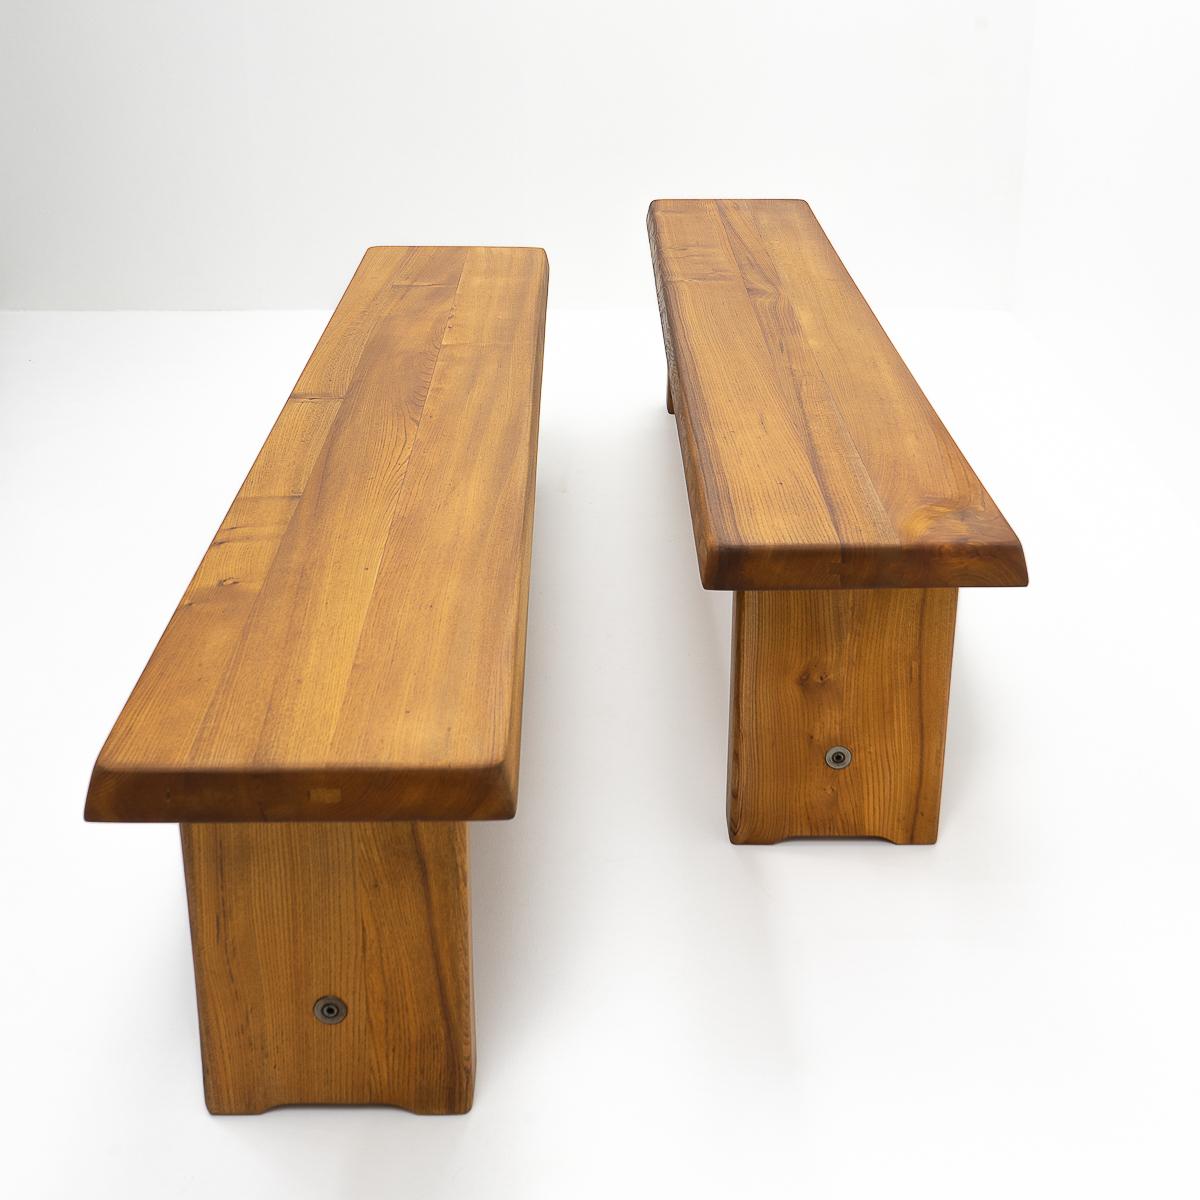 French Design Classic: Pierre Chapo, S14 Benches, 1980s In Good Condition For Sale In Renens, CH